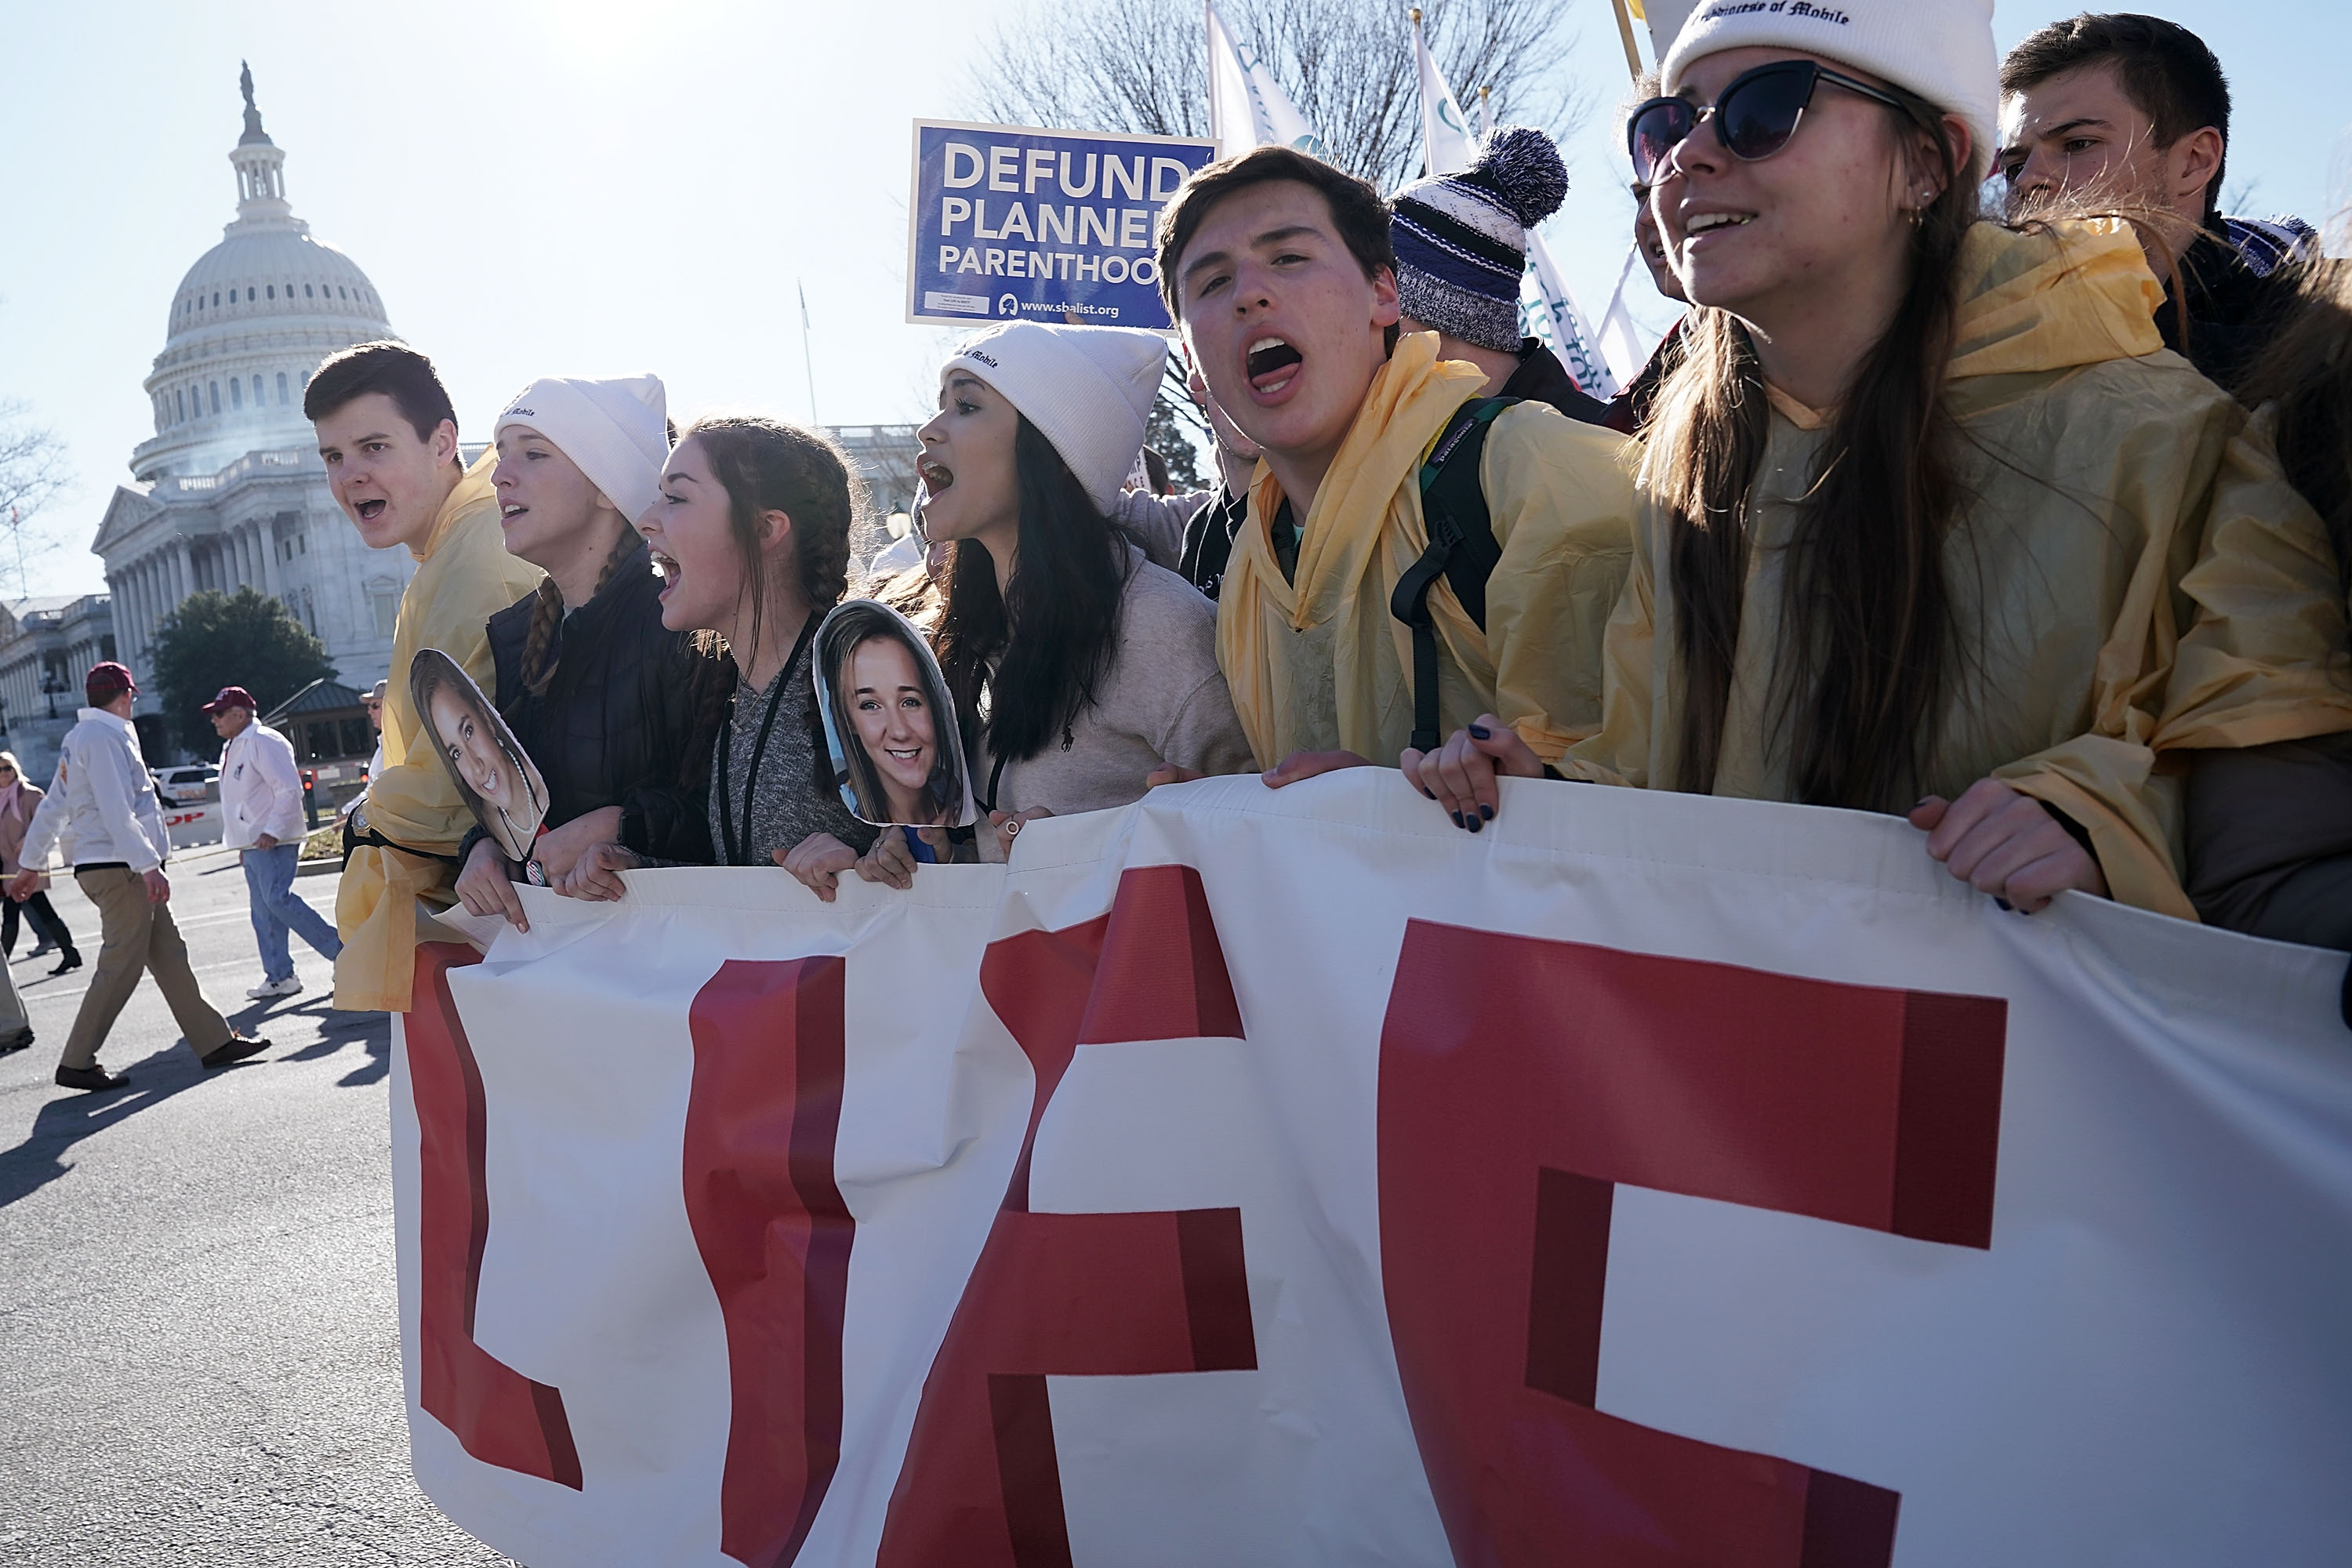 Pro-life activists participate in the 2018 March for Life as they pass in front of the U.S. Capitol January 19, 2018 in Washington, DC. Activists gathered in the nation's capital for the annual event to protest the anniversary of the Supreme Court Roe v. Wade ruling that legalized abortion in 1973. (Photo by Alex Wong/Getty Images)